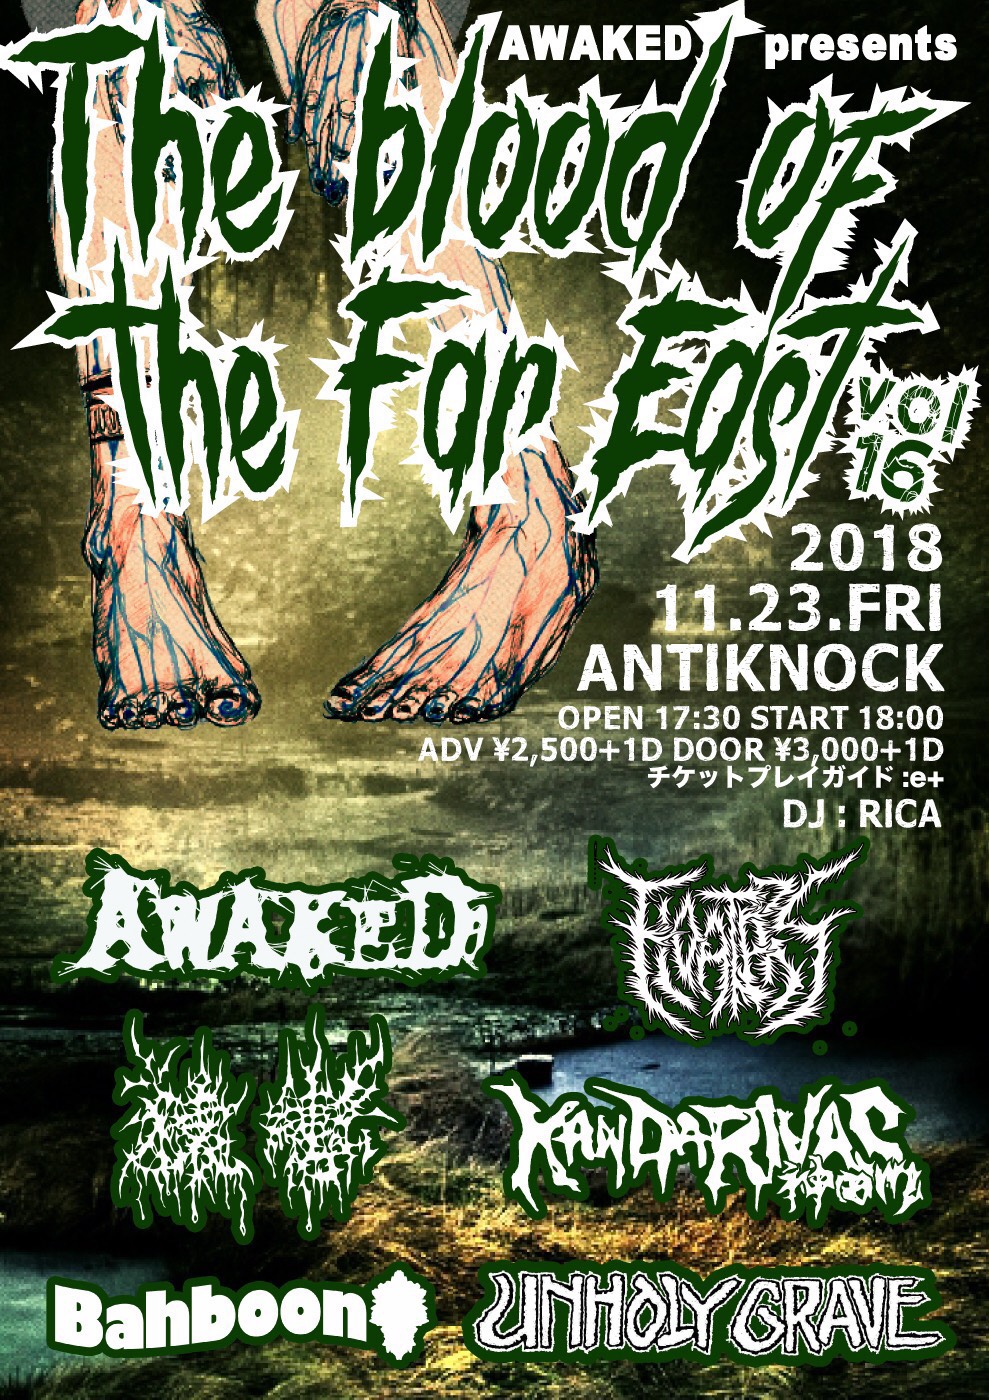 AWAKED presents 【The blood of the Far East vol.16】